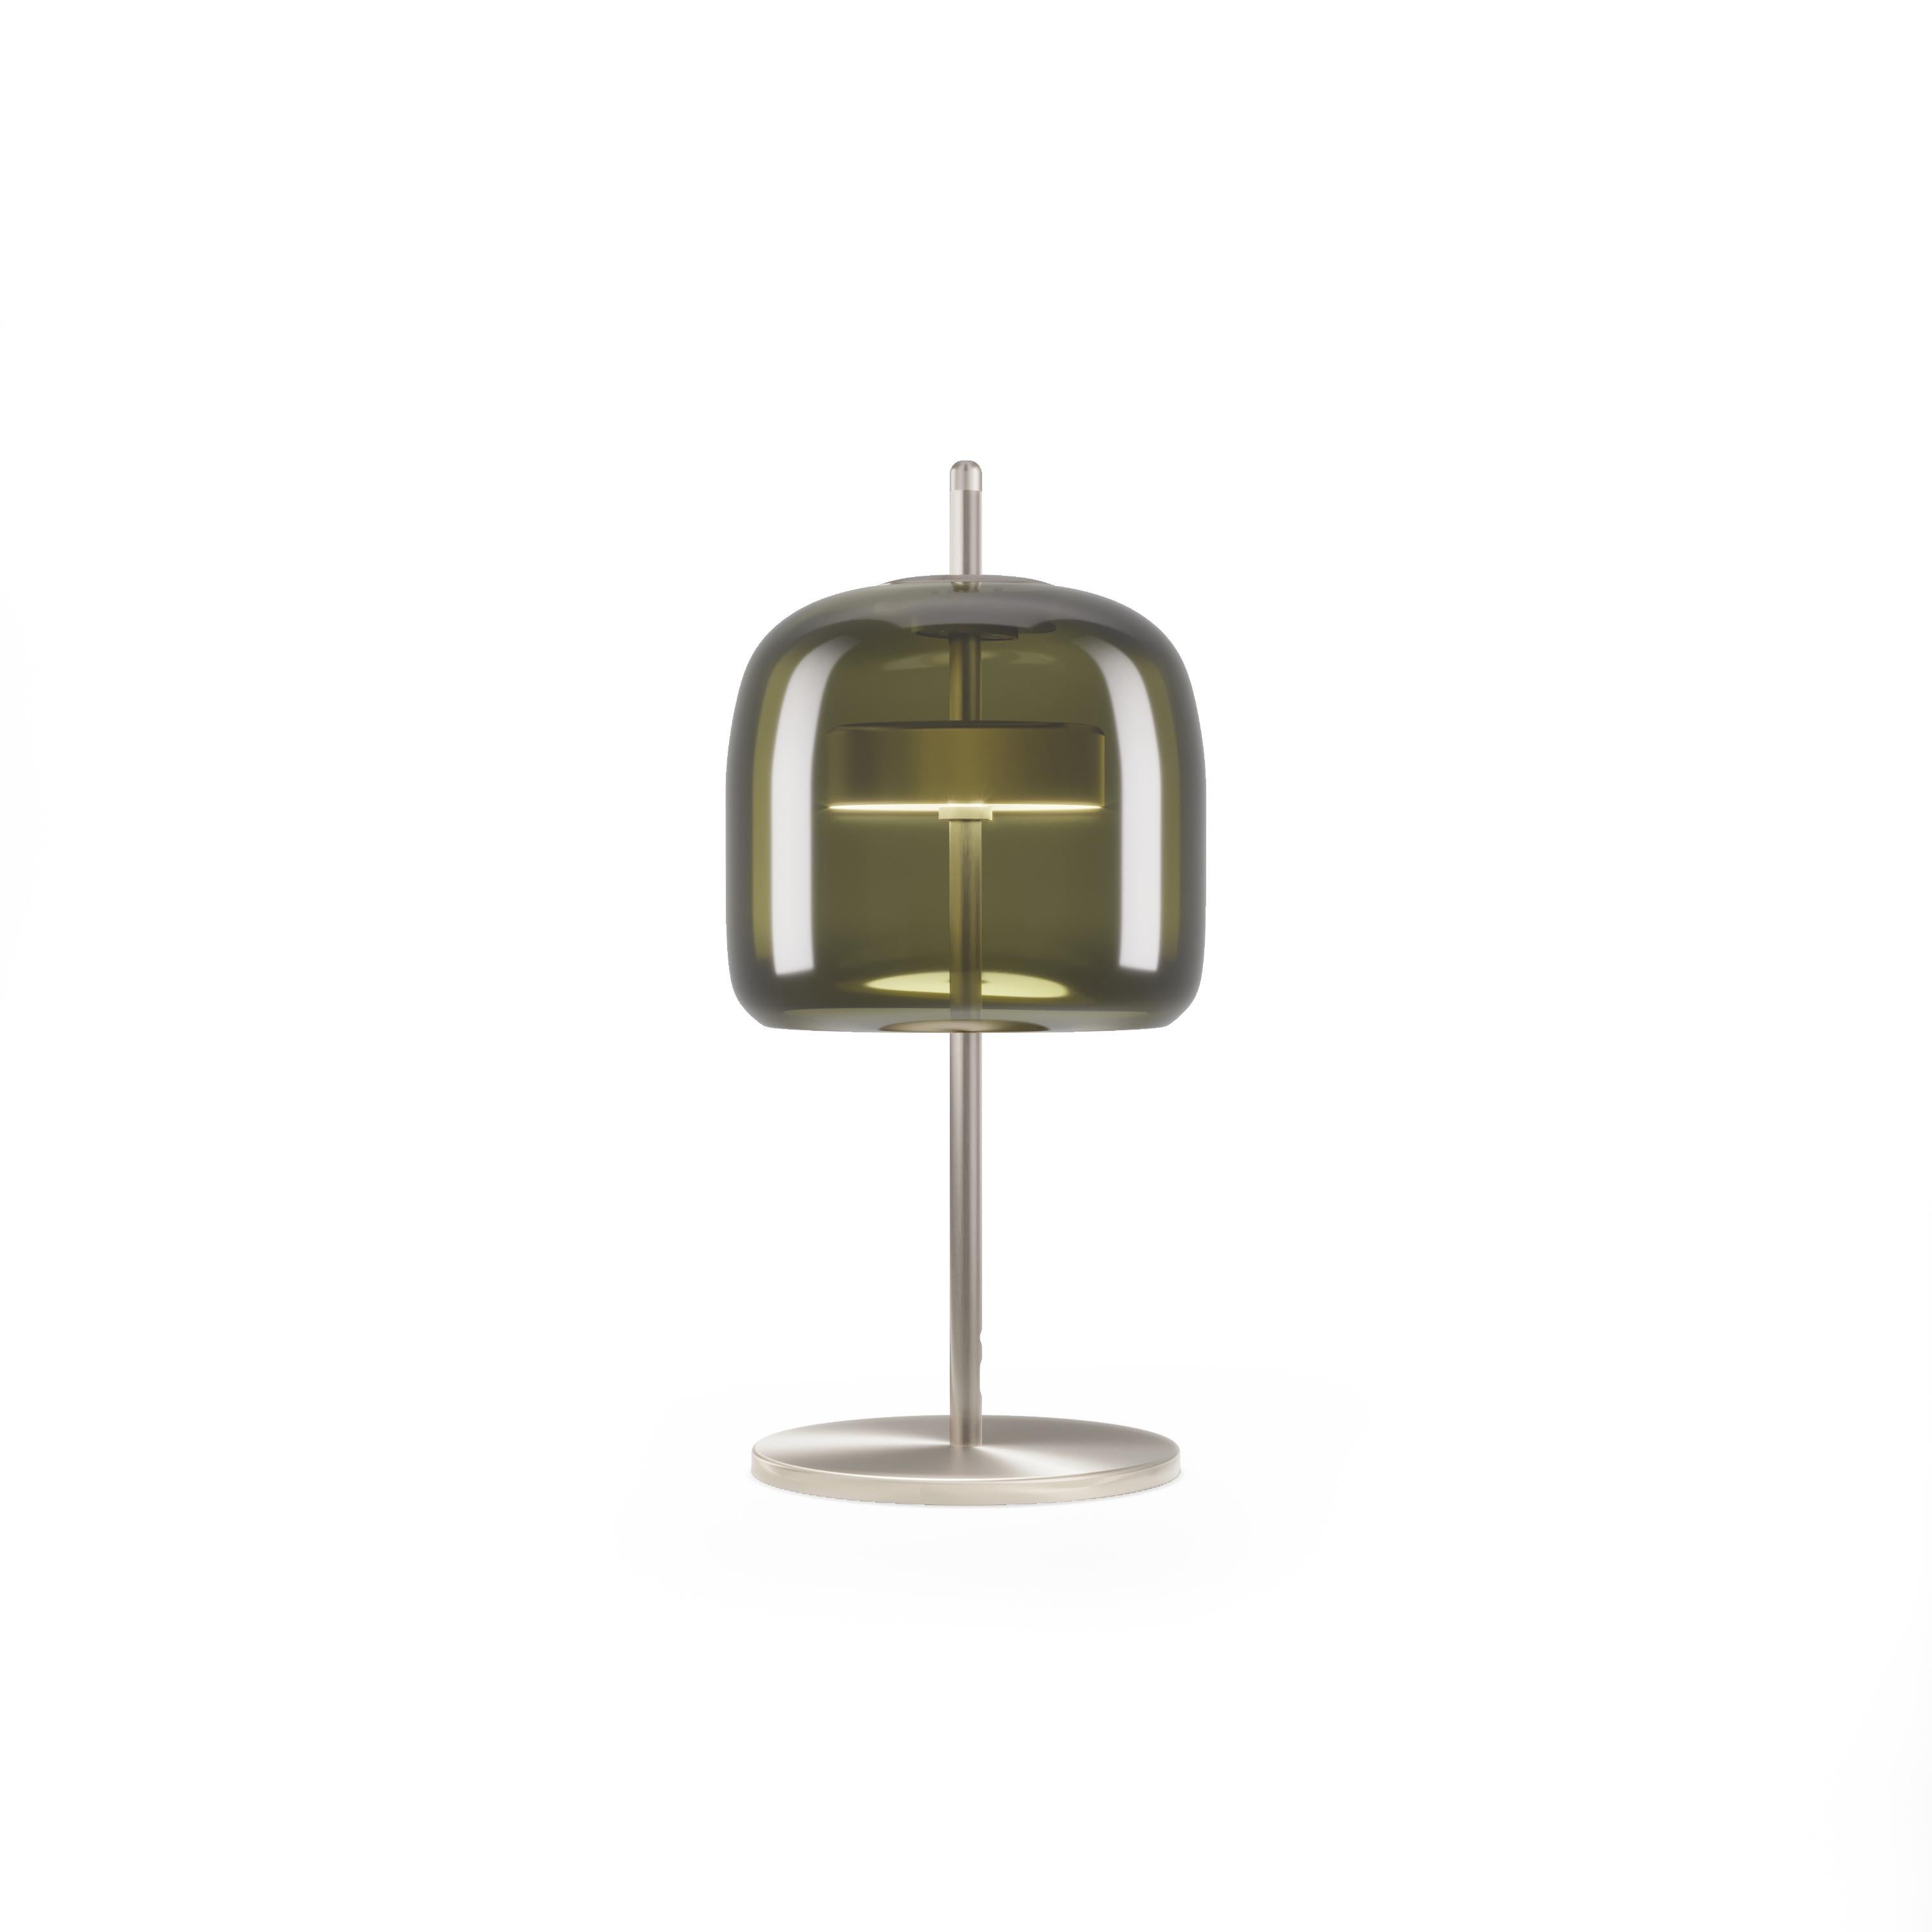 Modern Vistosi Jube Table Lamp in Old Green Transparent Glass And Matt Steel Finish For Sale